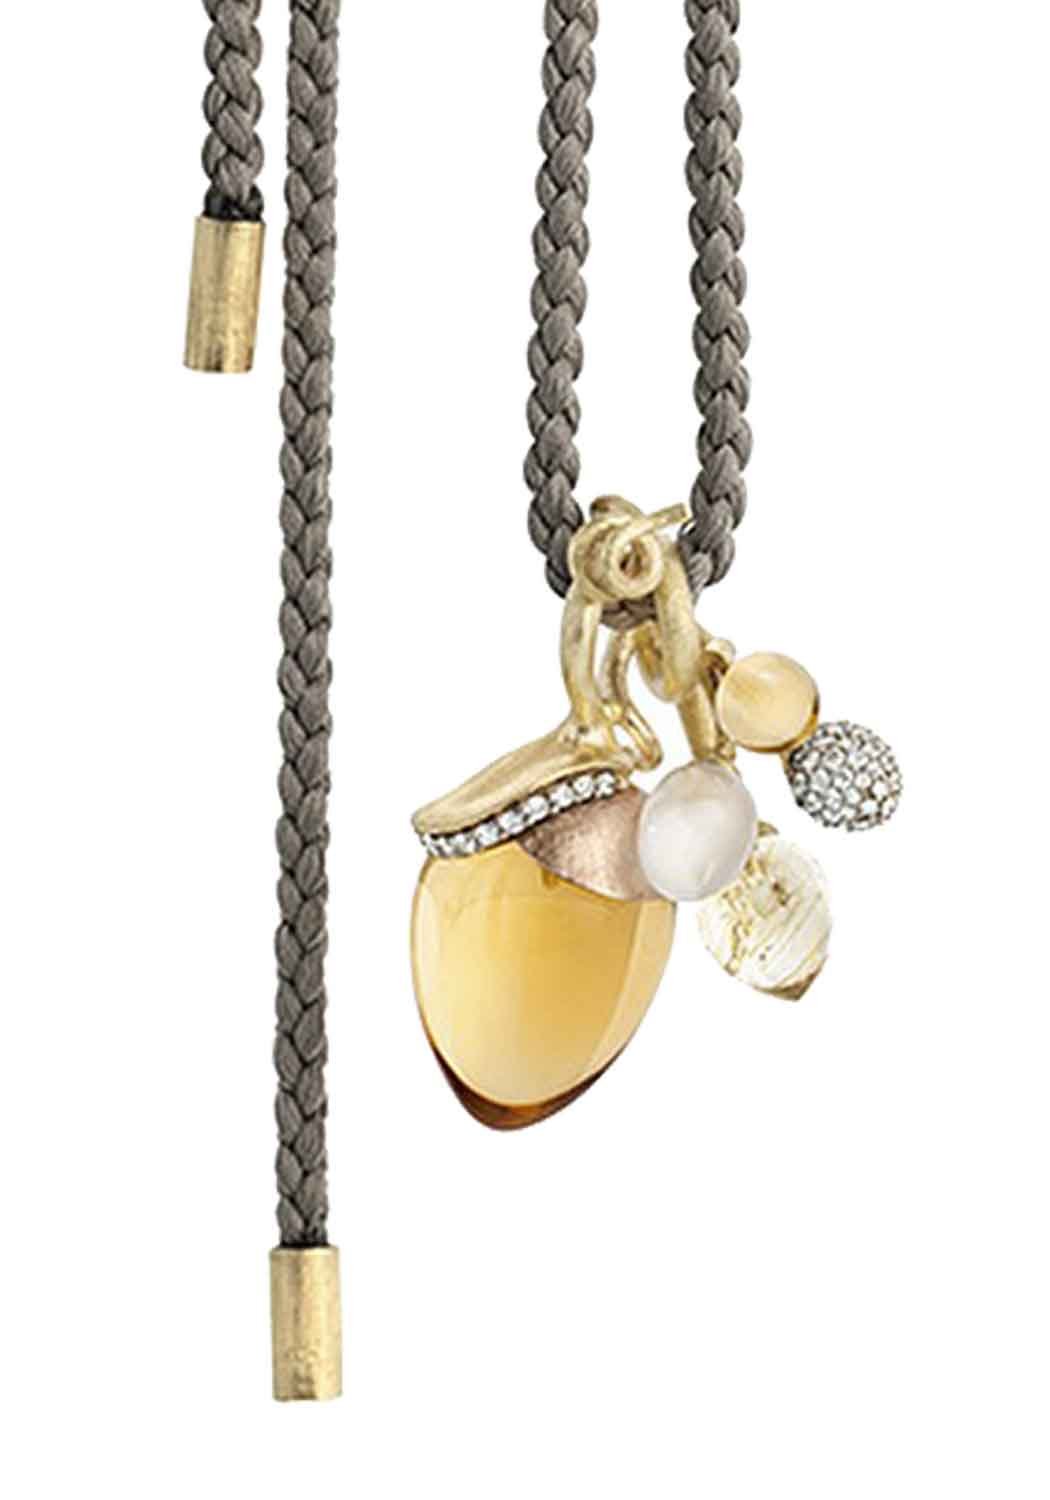 OLE LYNGGAARD Twisted Mokuba Silk String with charms (sold separately) | OsterJewelers.com